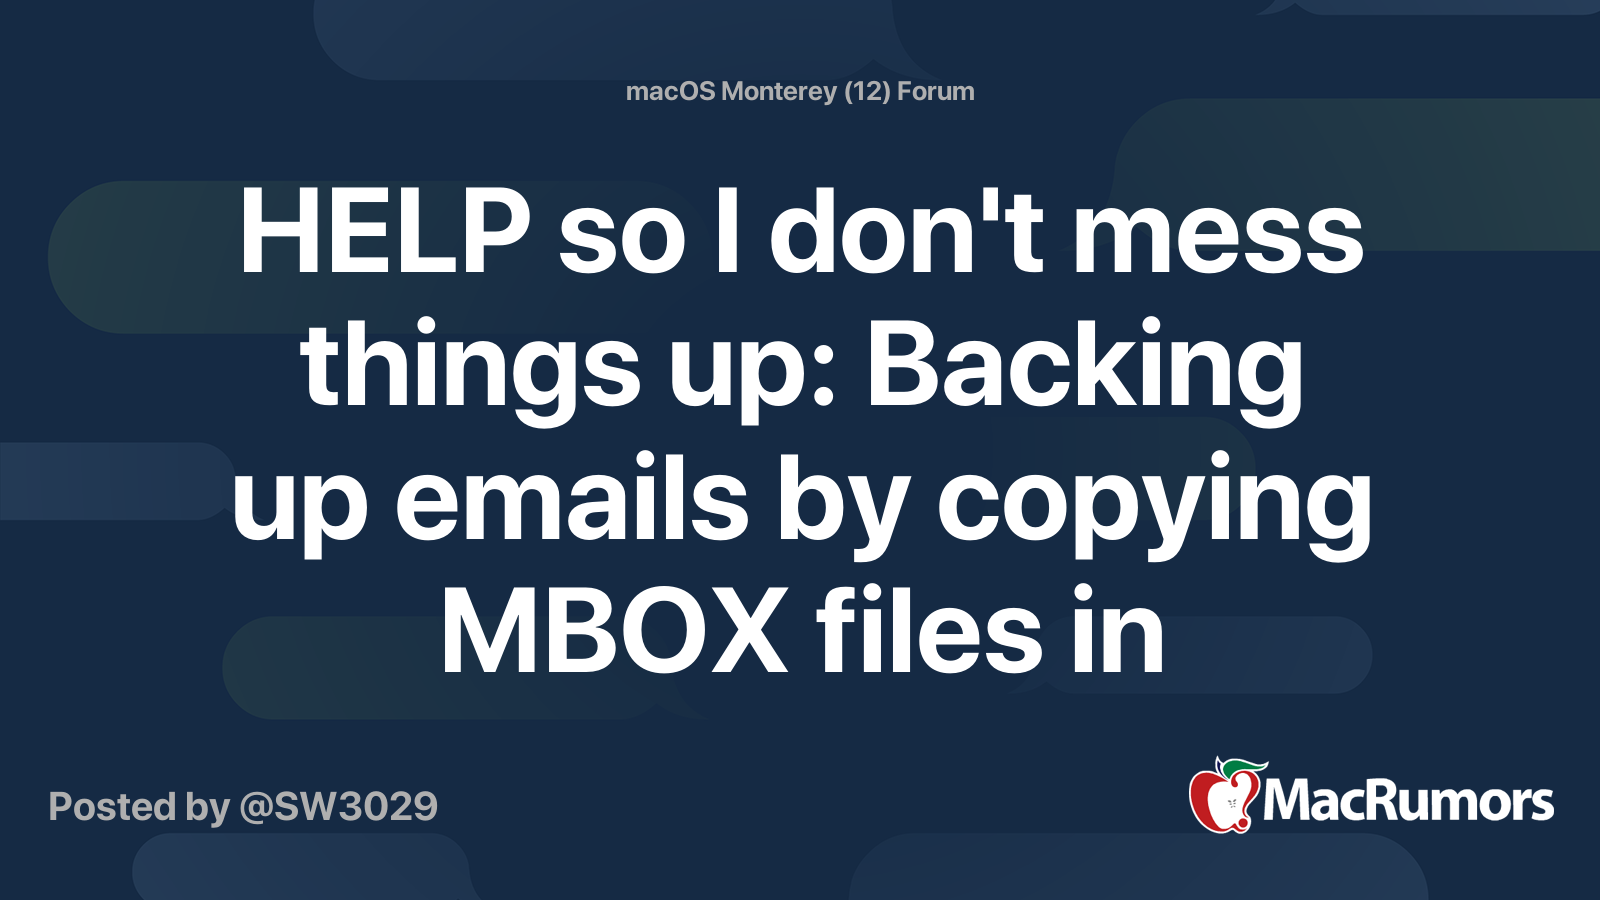 HELP so I don’t mess things up: Backing up emails by copying MBOX files in Library>Mail?